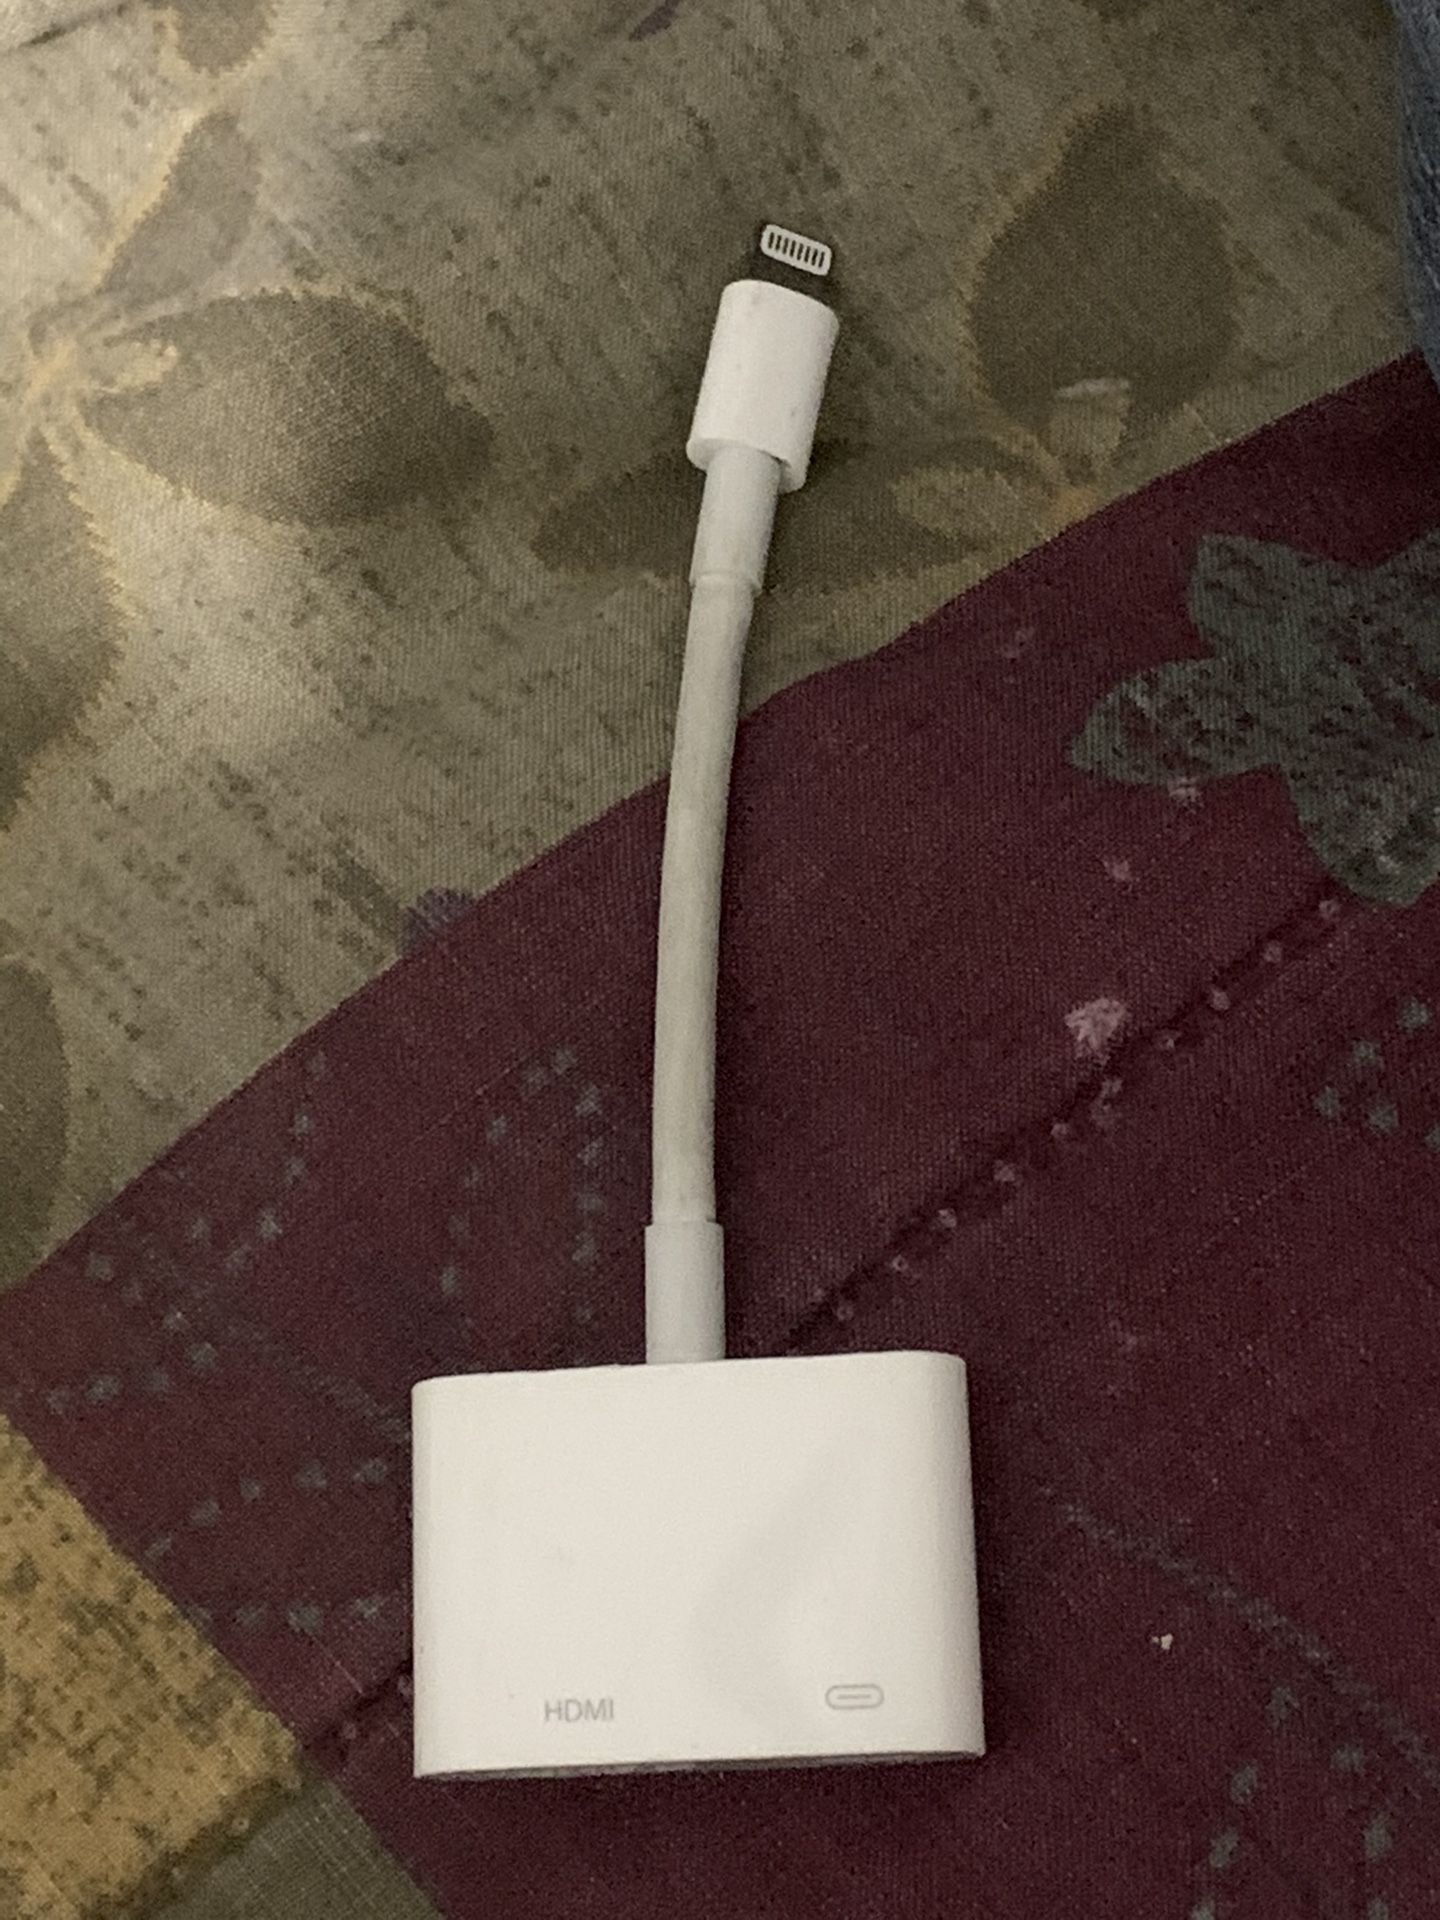 Apple hdmi adapter for tv mirroring casting